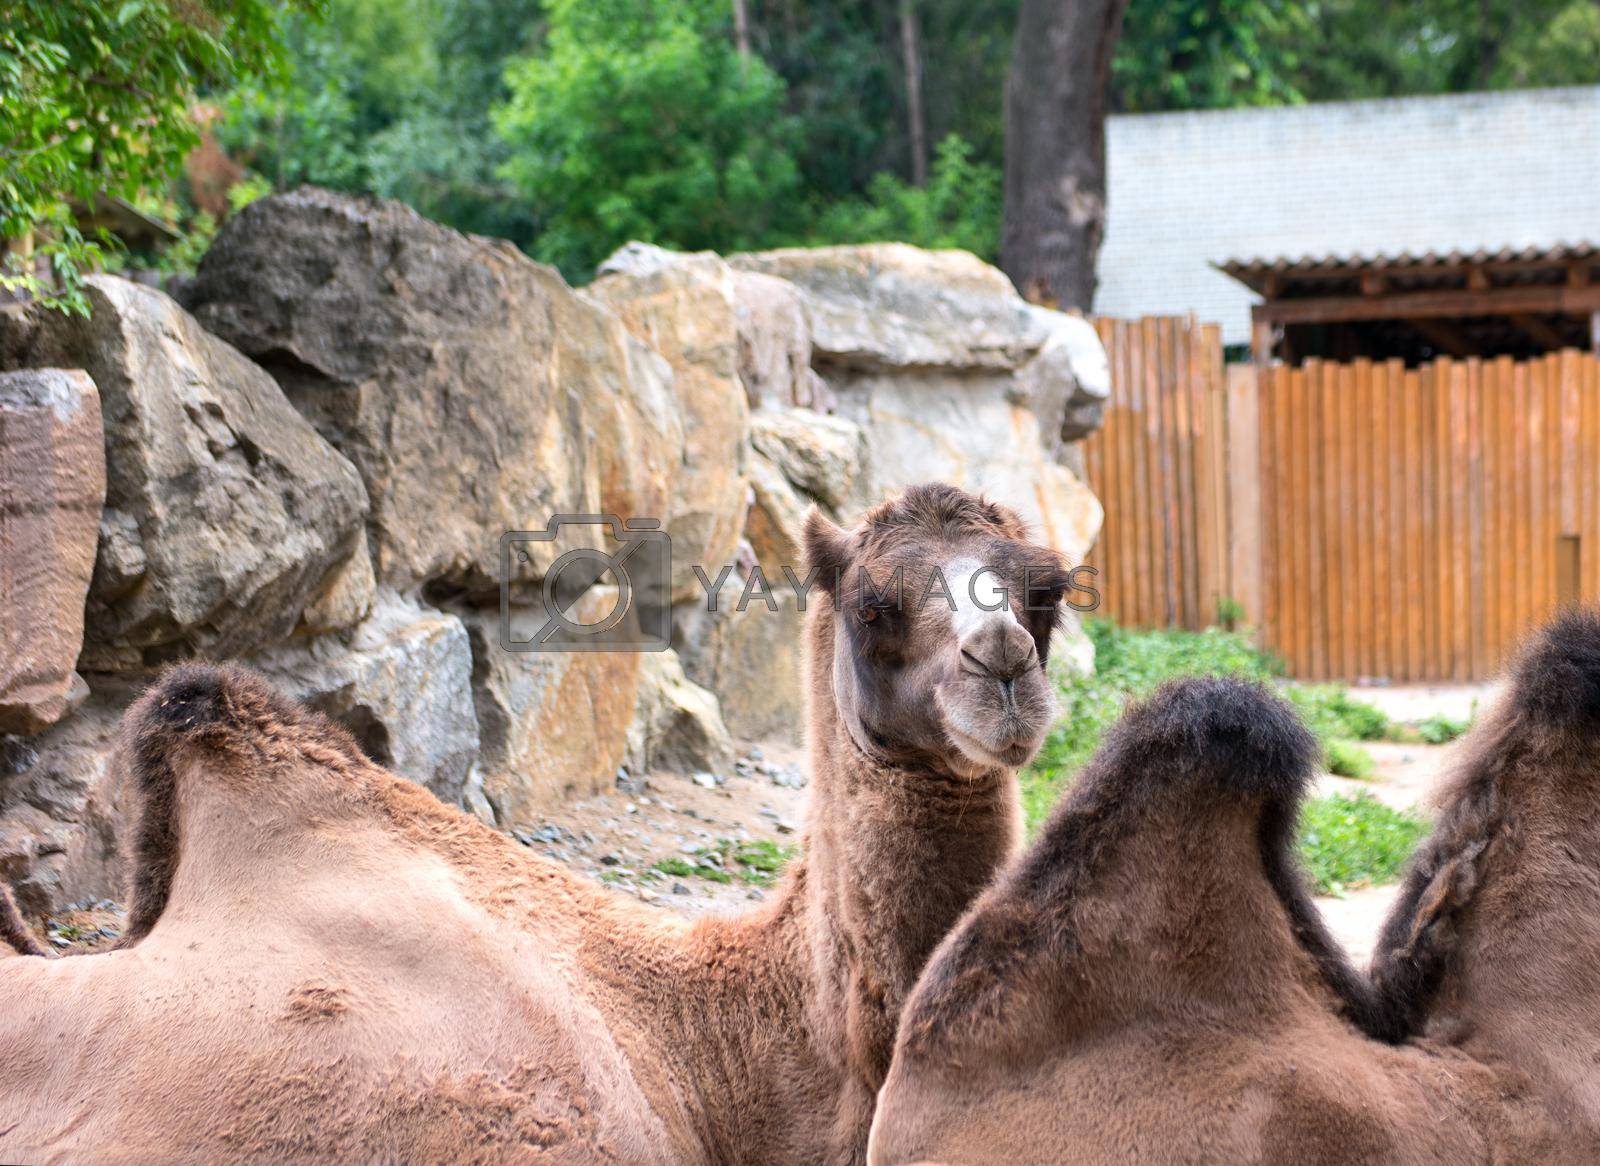 Royalty free image of Camel in zoo by andregric